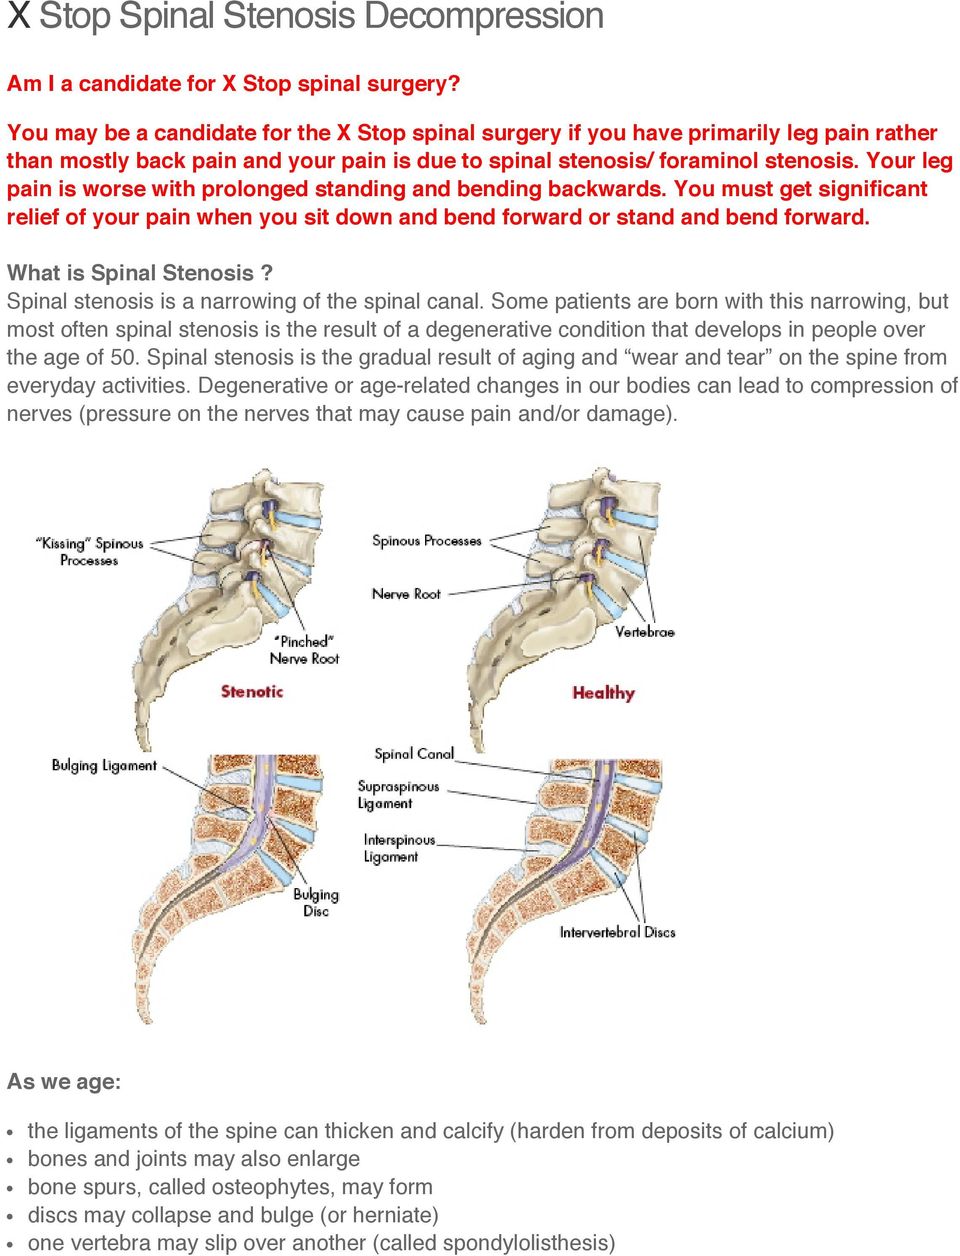 Your leg pain is worse with prolonged standing and bending backwards. You must get significant relief of your pain when you sit down and bend forward or stand and bend forward.